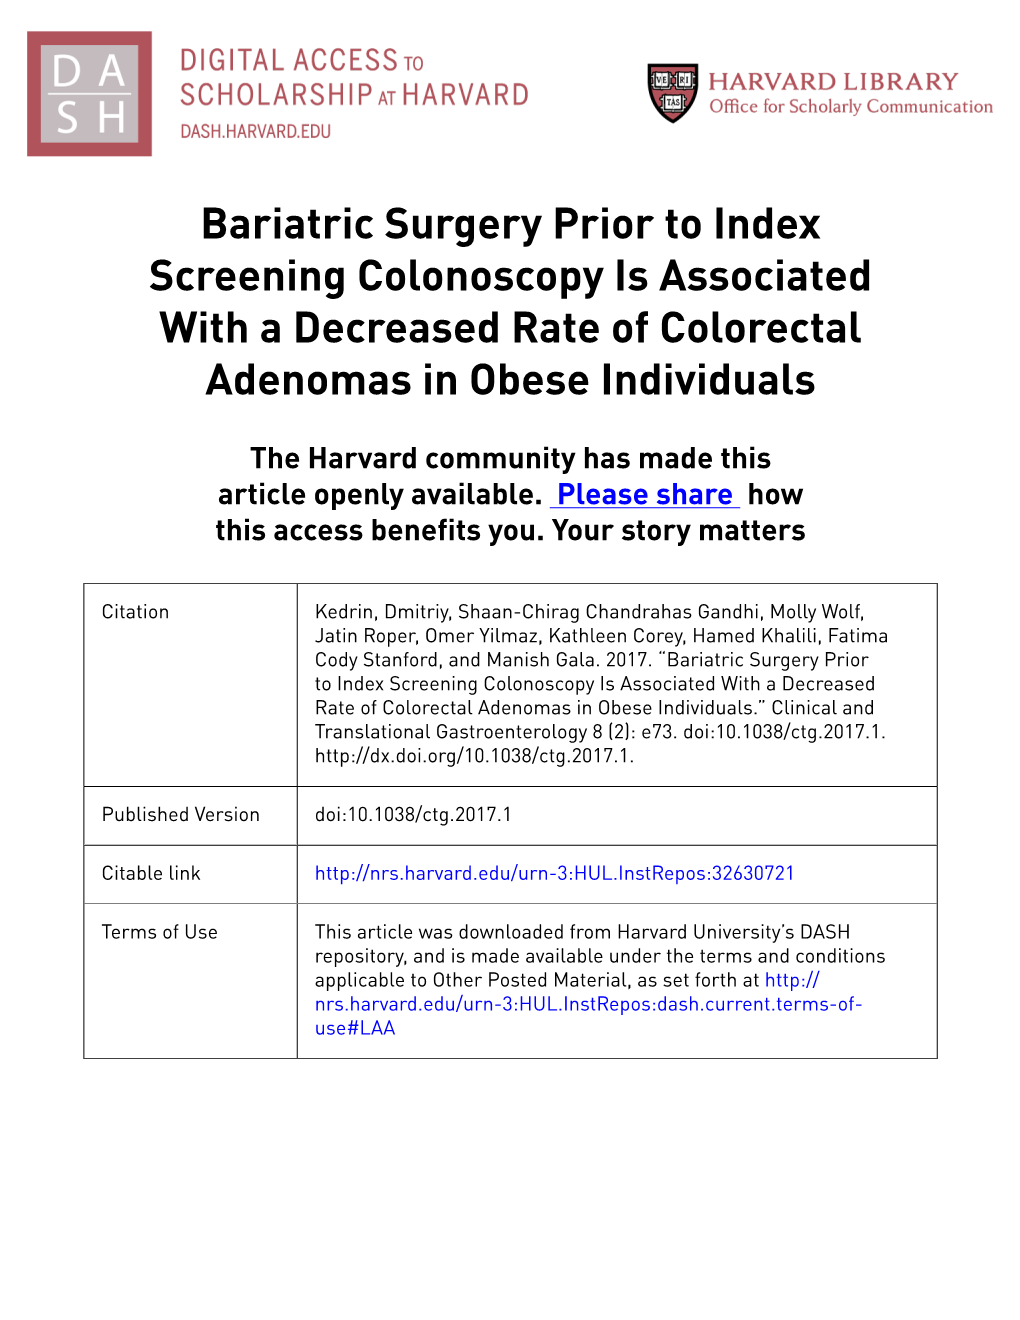 Bariatric Surgery Prior to Index Screening Colonoscopy Is Associated with a Decreased Rate of Colorectal Adenomas in Obese Individuals